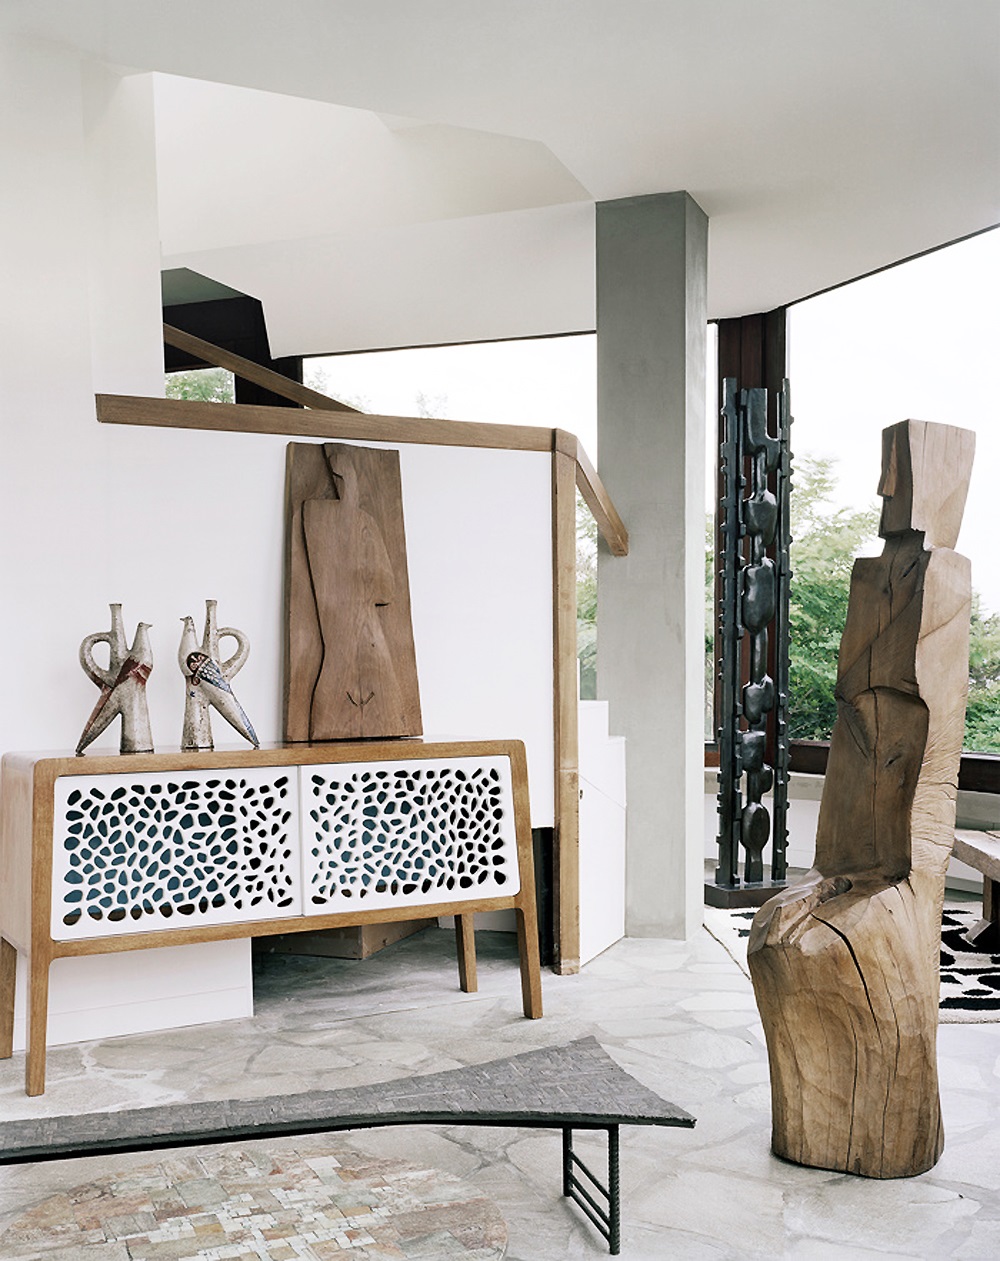 Coffee table by Pia Manu, Wooden Sculpture by Jean Touret, Bas-relief by Pierre Caruana, Ceramics by Jean Derval, Bronze totem by Francois Stahly